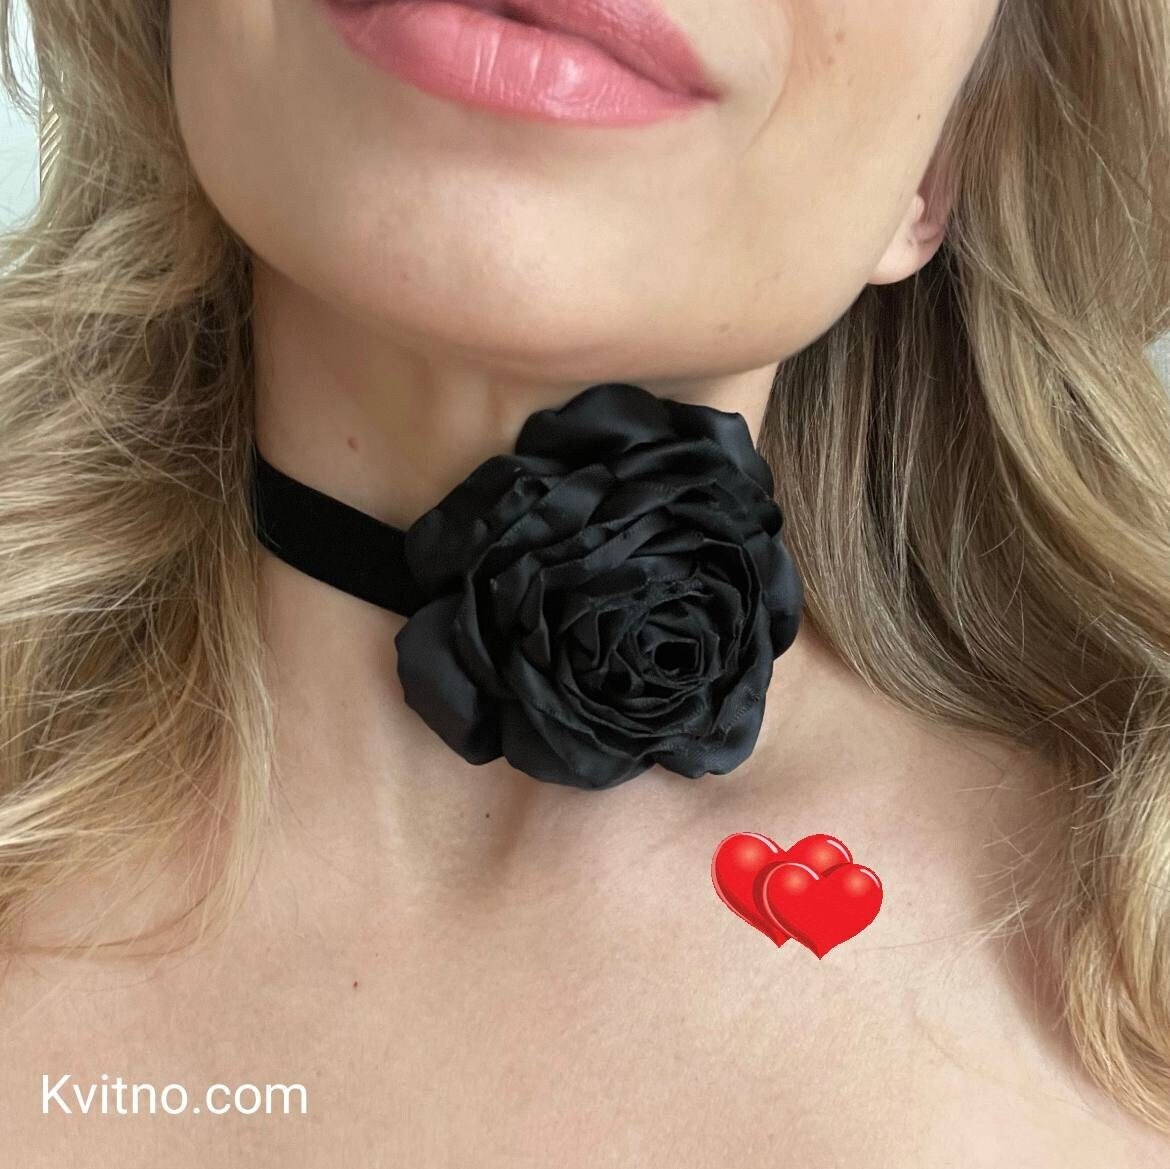 Choker Necklace Red Rose and Vintage Black Lace - $8.00